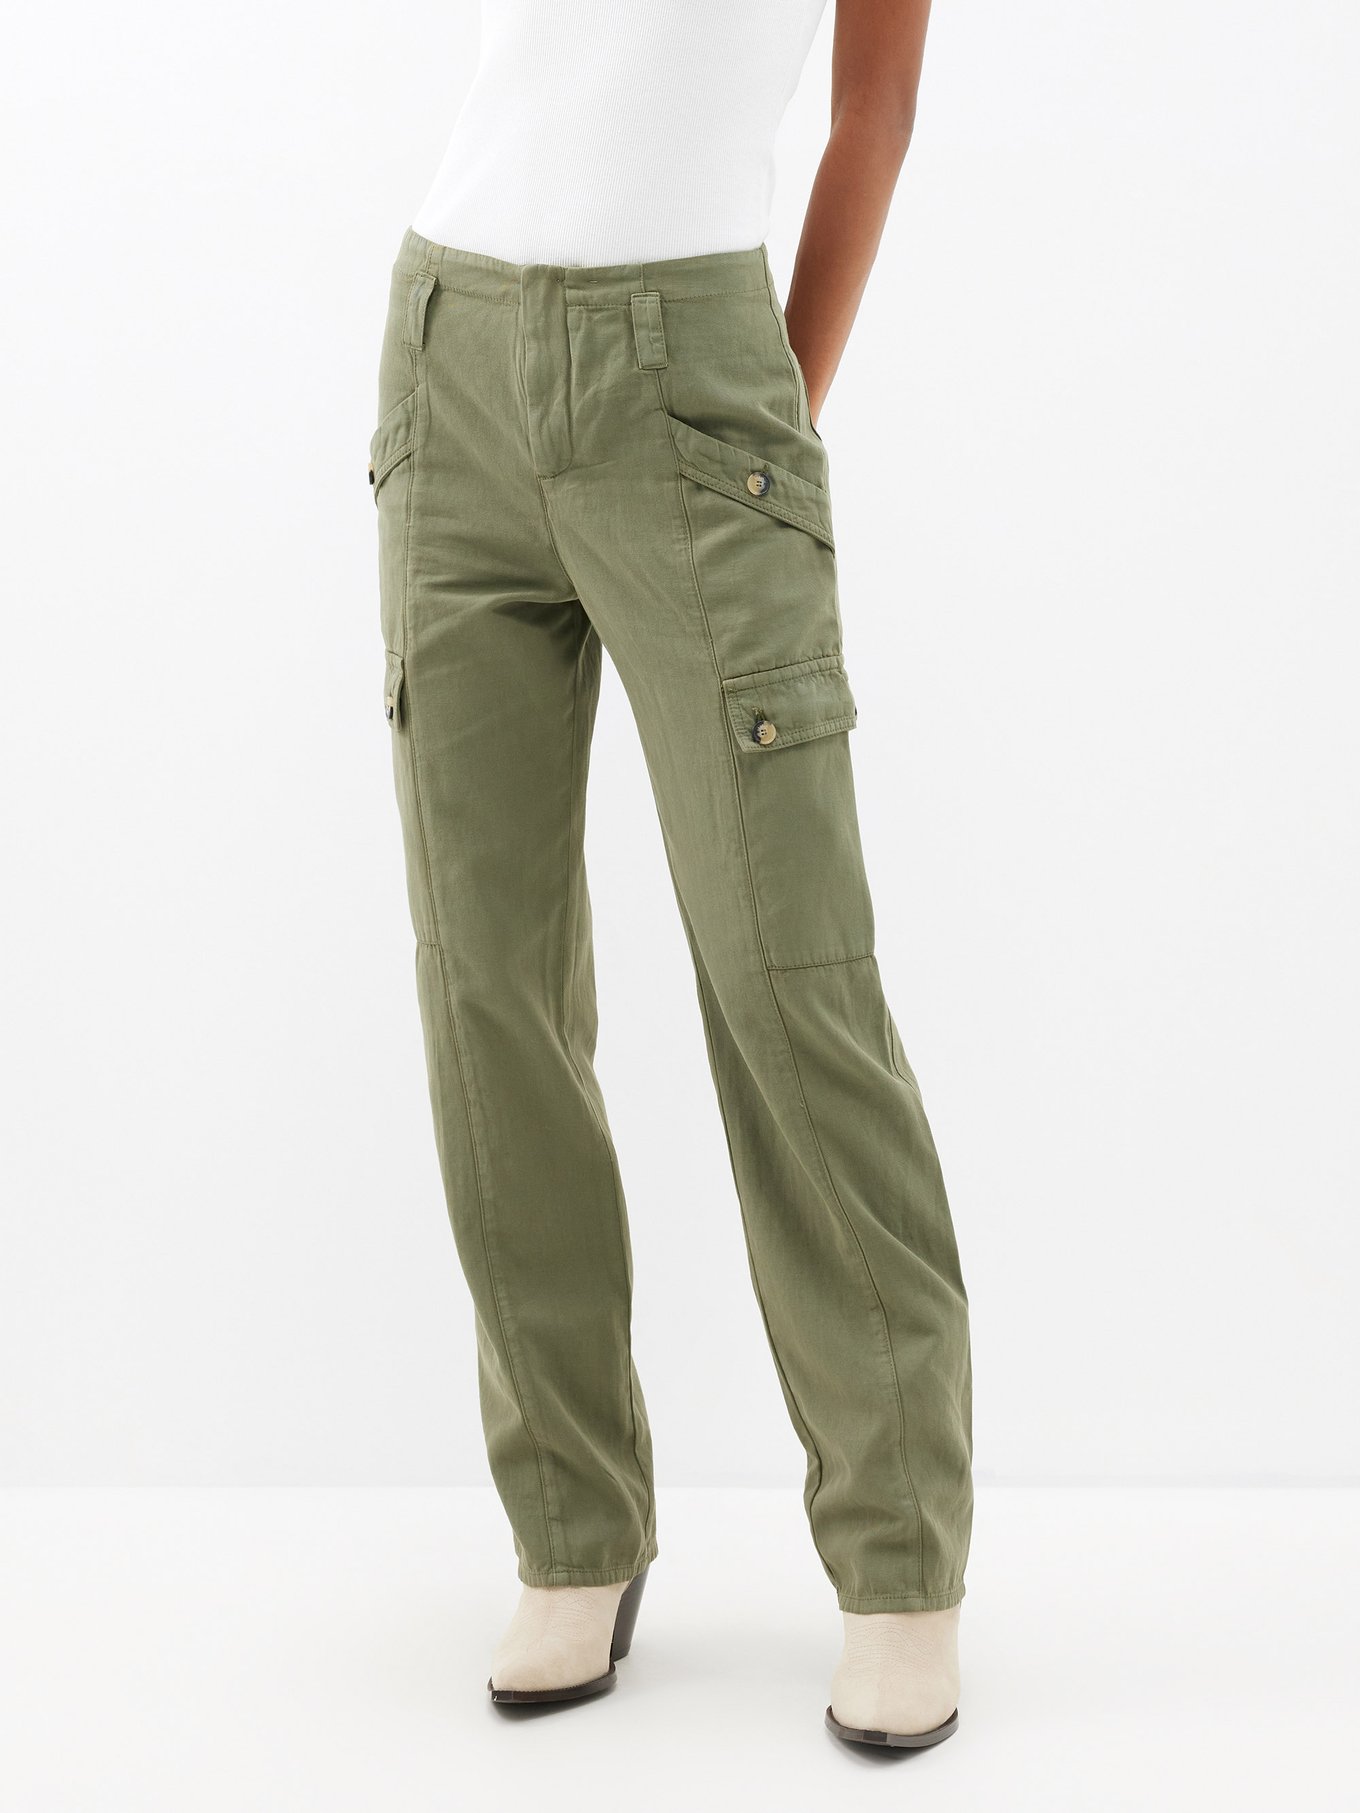 Buy Mehndi Green Side Pocket Straight Cargo Pants Cotton for Best Price,  Reviews, Free Shipping